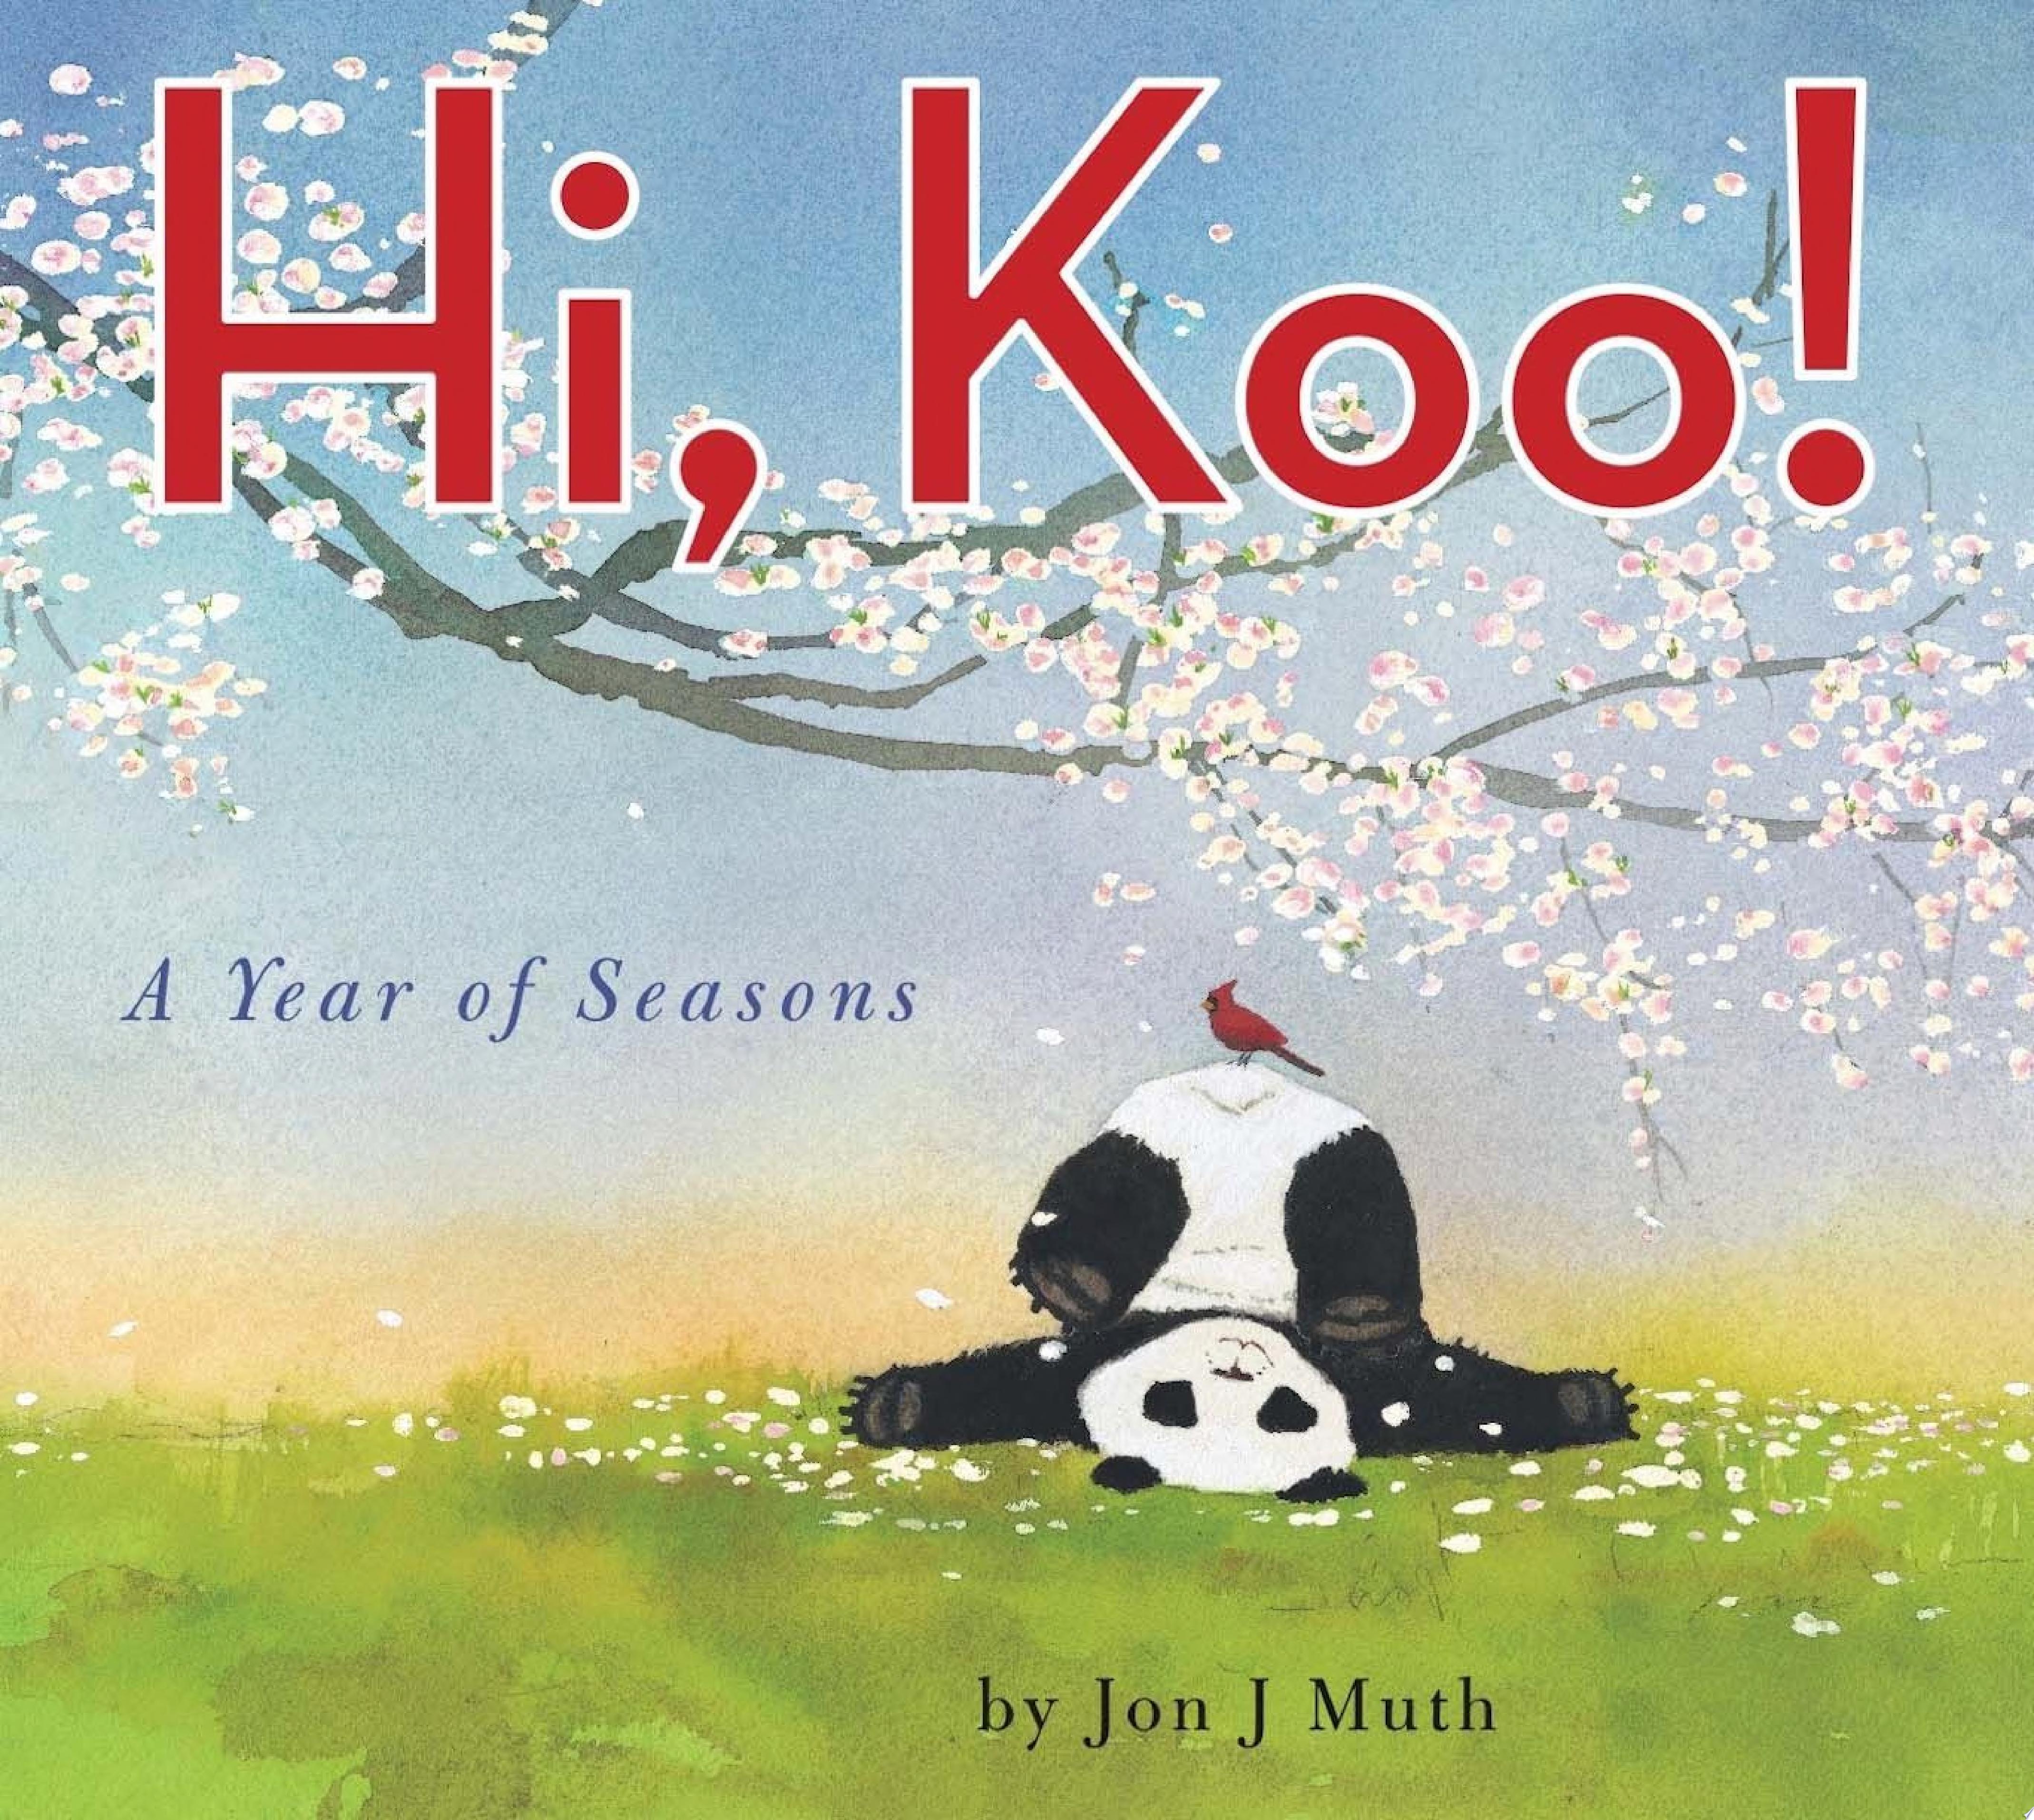 Image for "Hi, Koo!: A Year of Seasons (A Stillwater Book)"